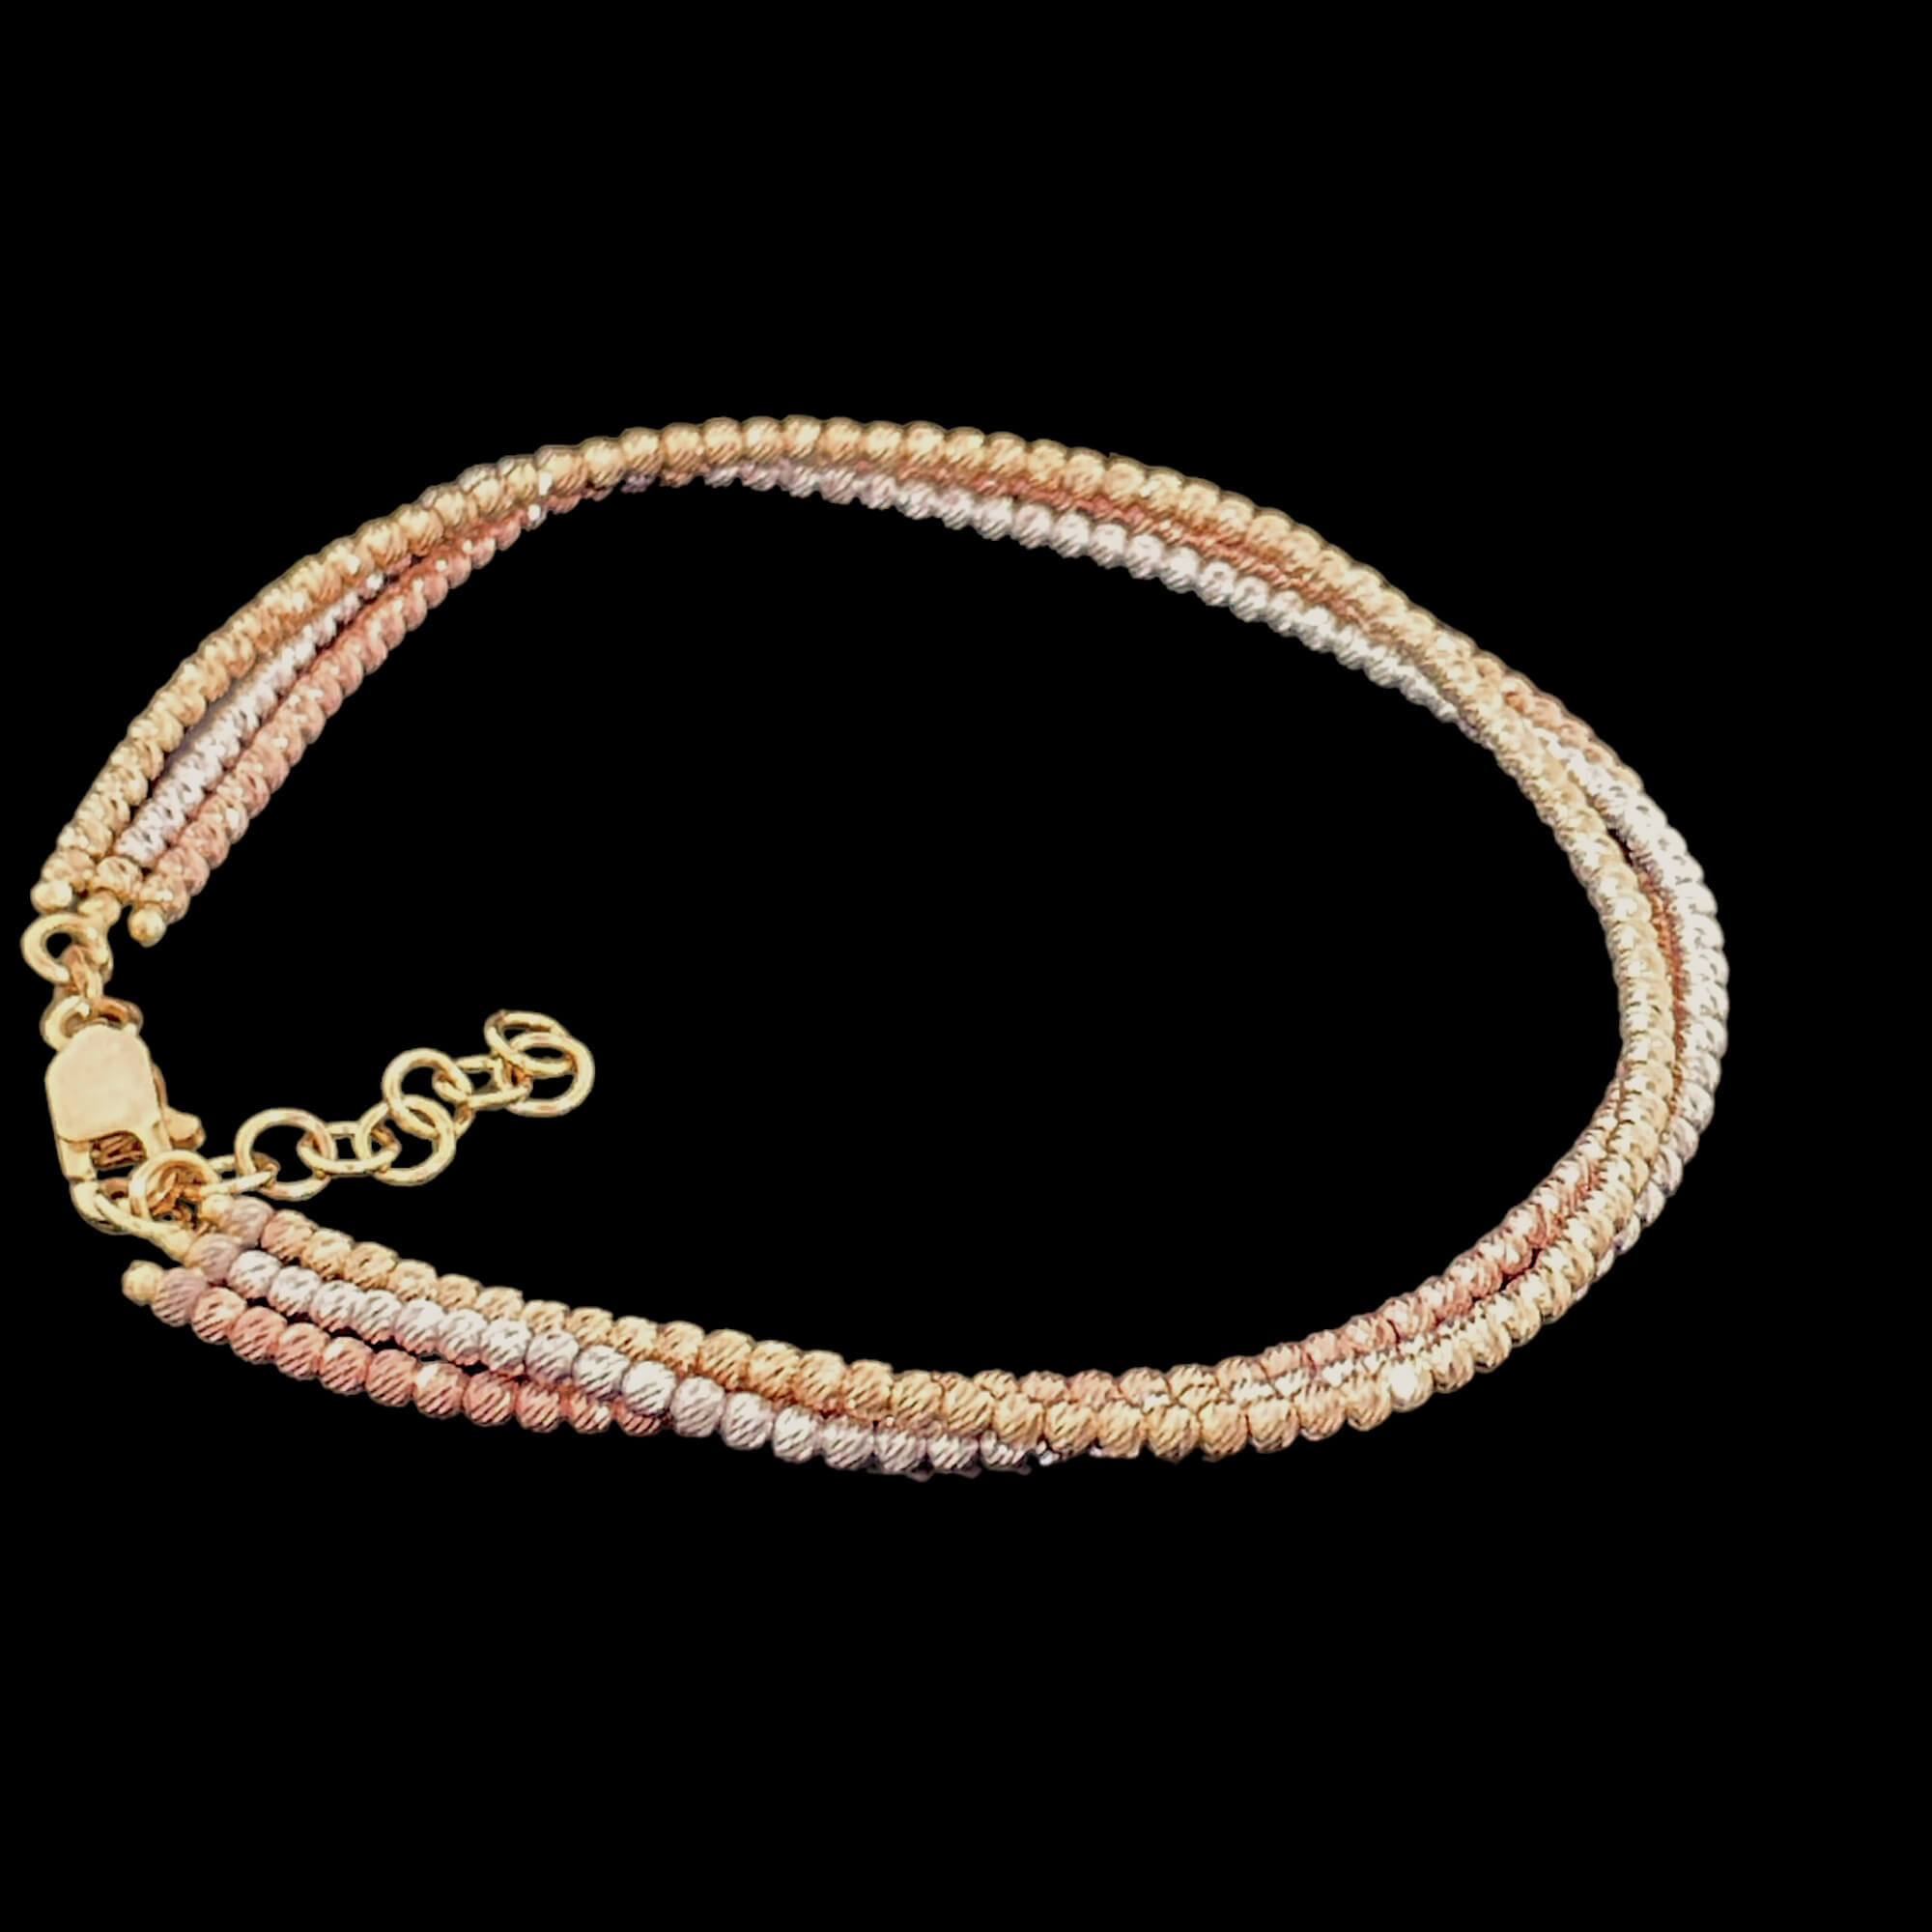 2mm bracelet of three rows of silver, rose and gold plated